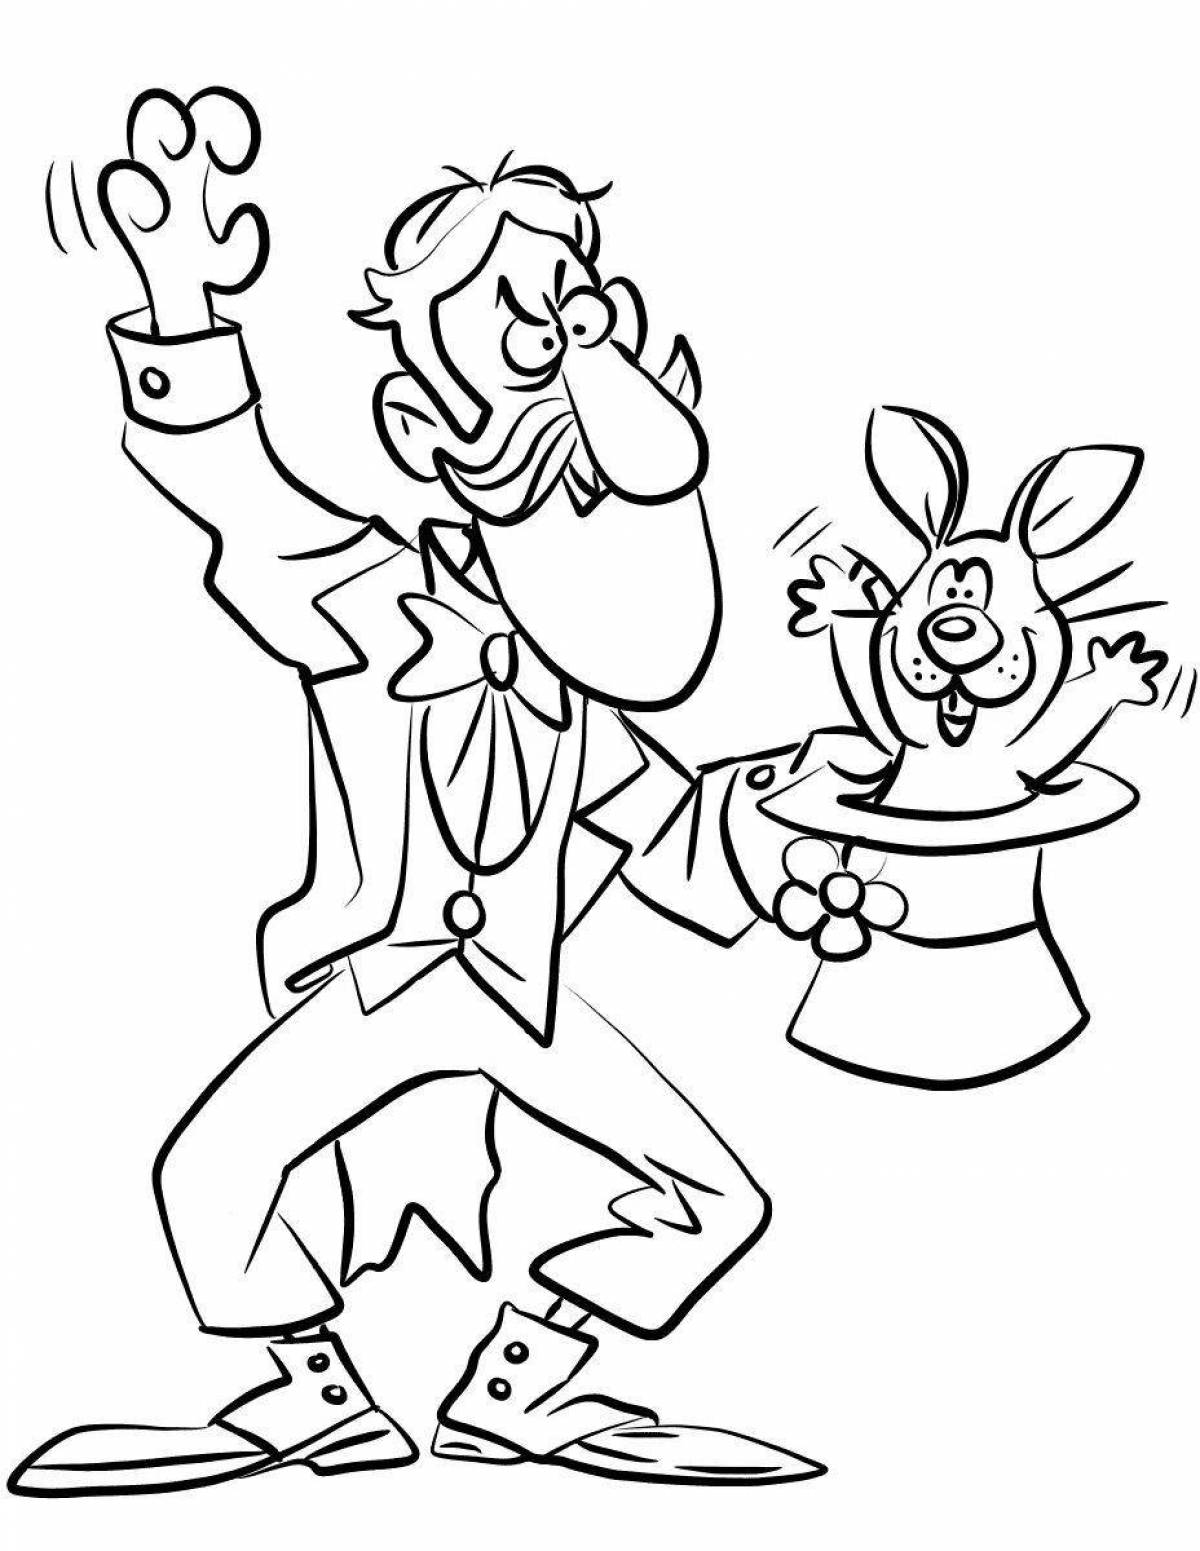 Humorous coloring page focus